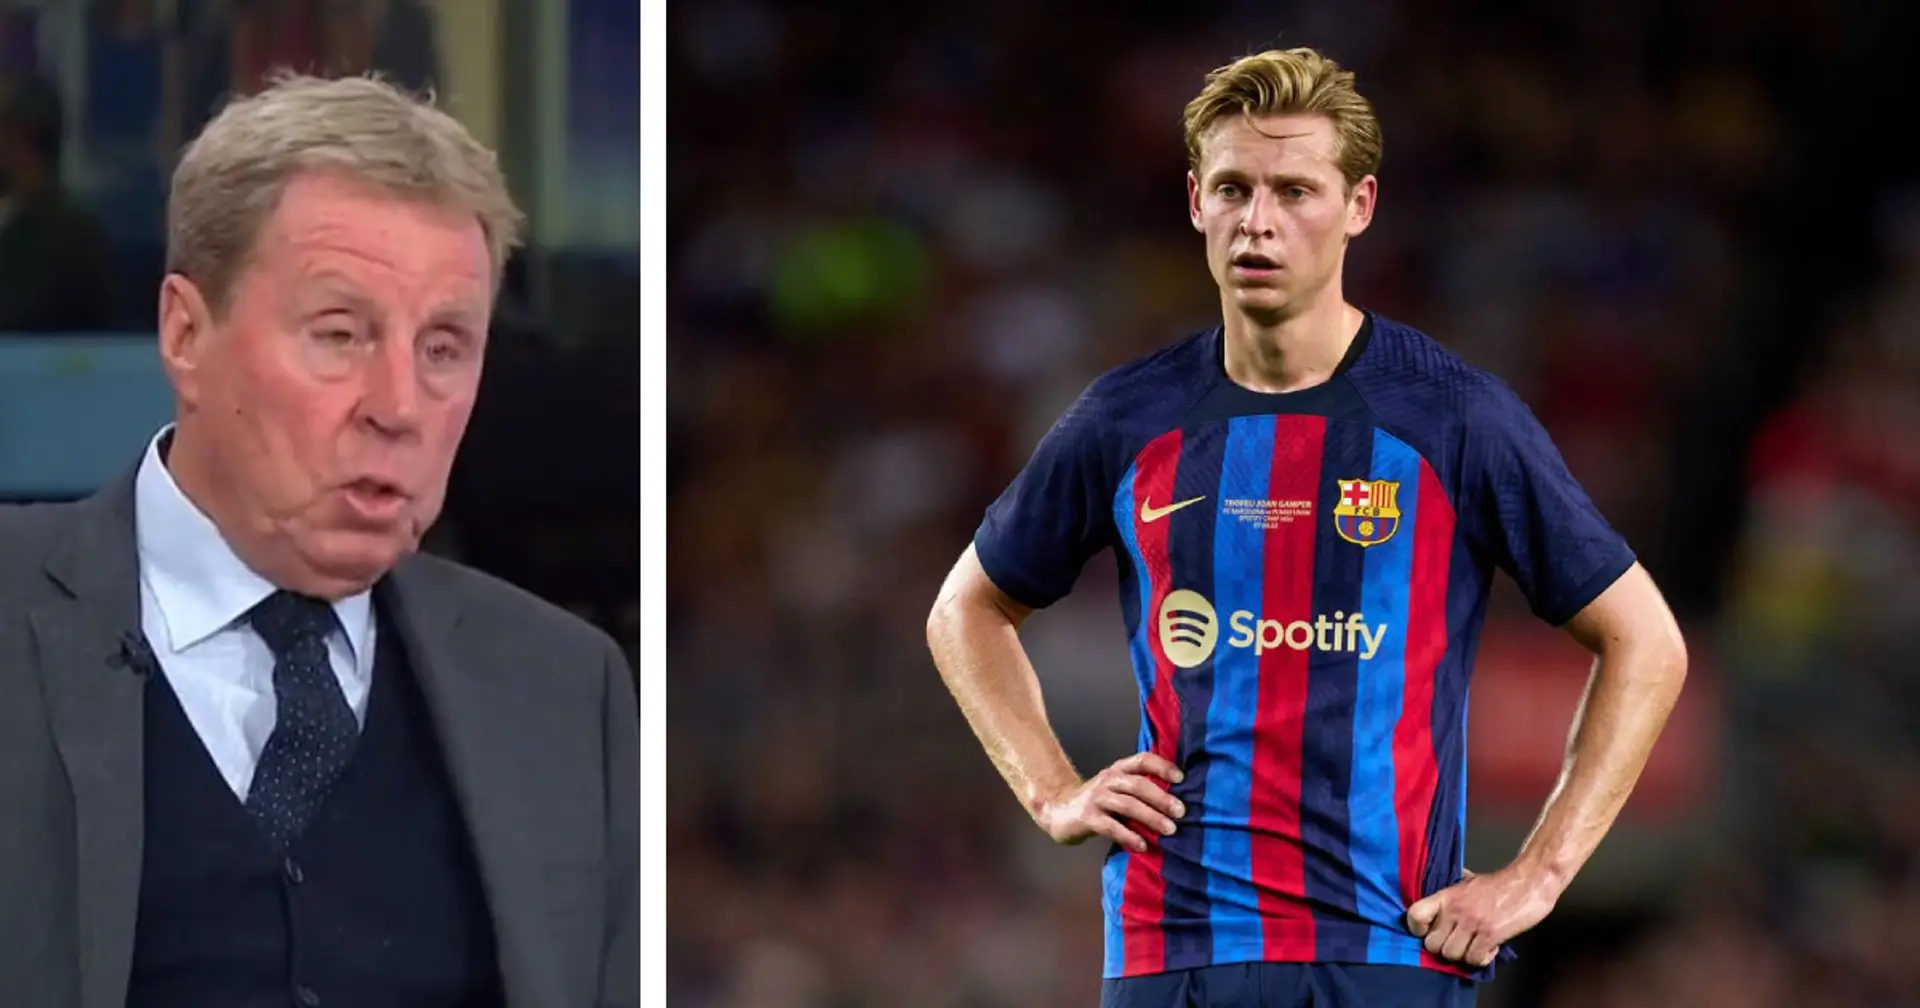 Harry Redknapp says De Jong will join Chelsea: 'I know for a fact, he's made up his mind'